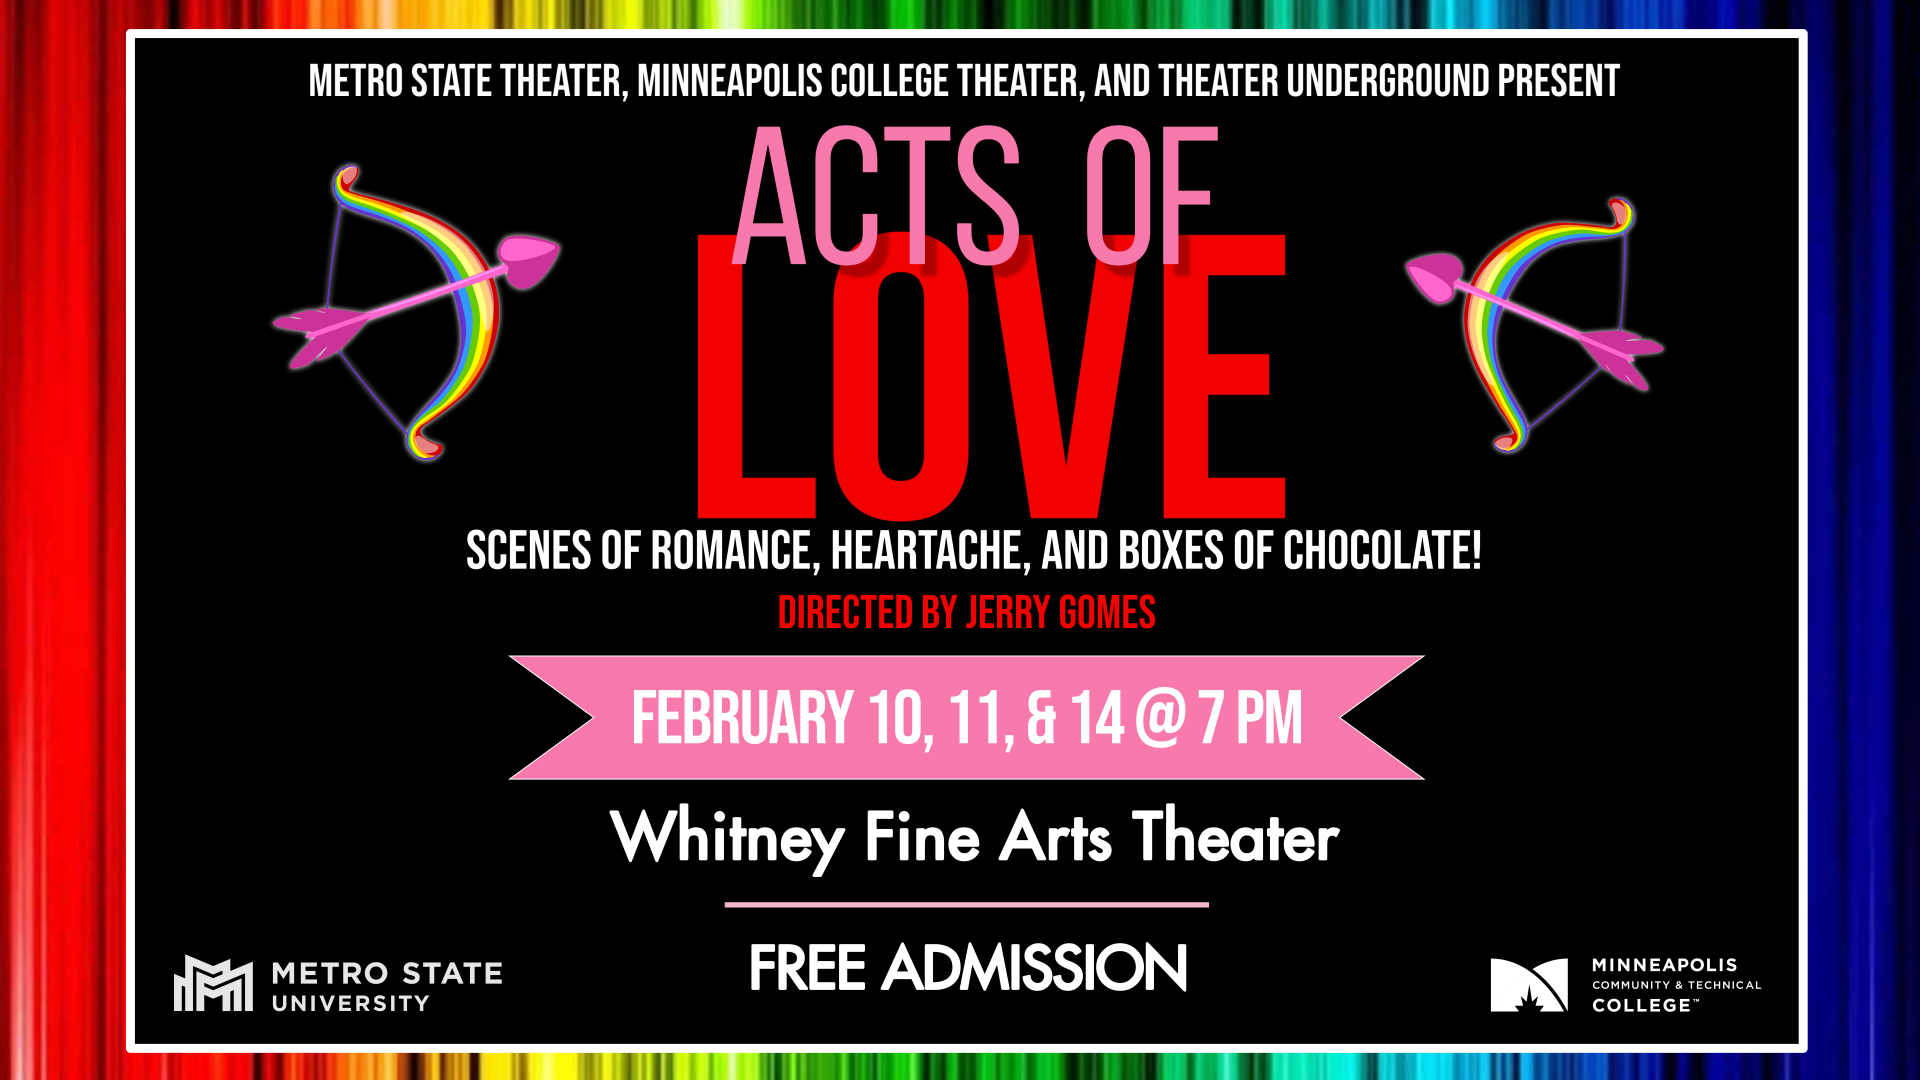 Acts of Love: Scenes of romance, heartache, and boxes of chocolate, February 11, 12, and 14. Details in text below. 